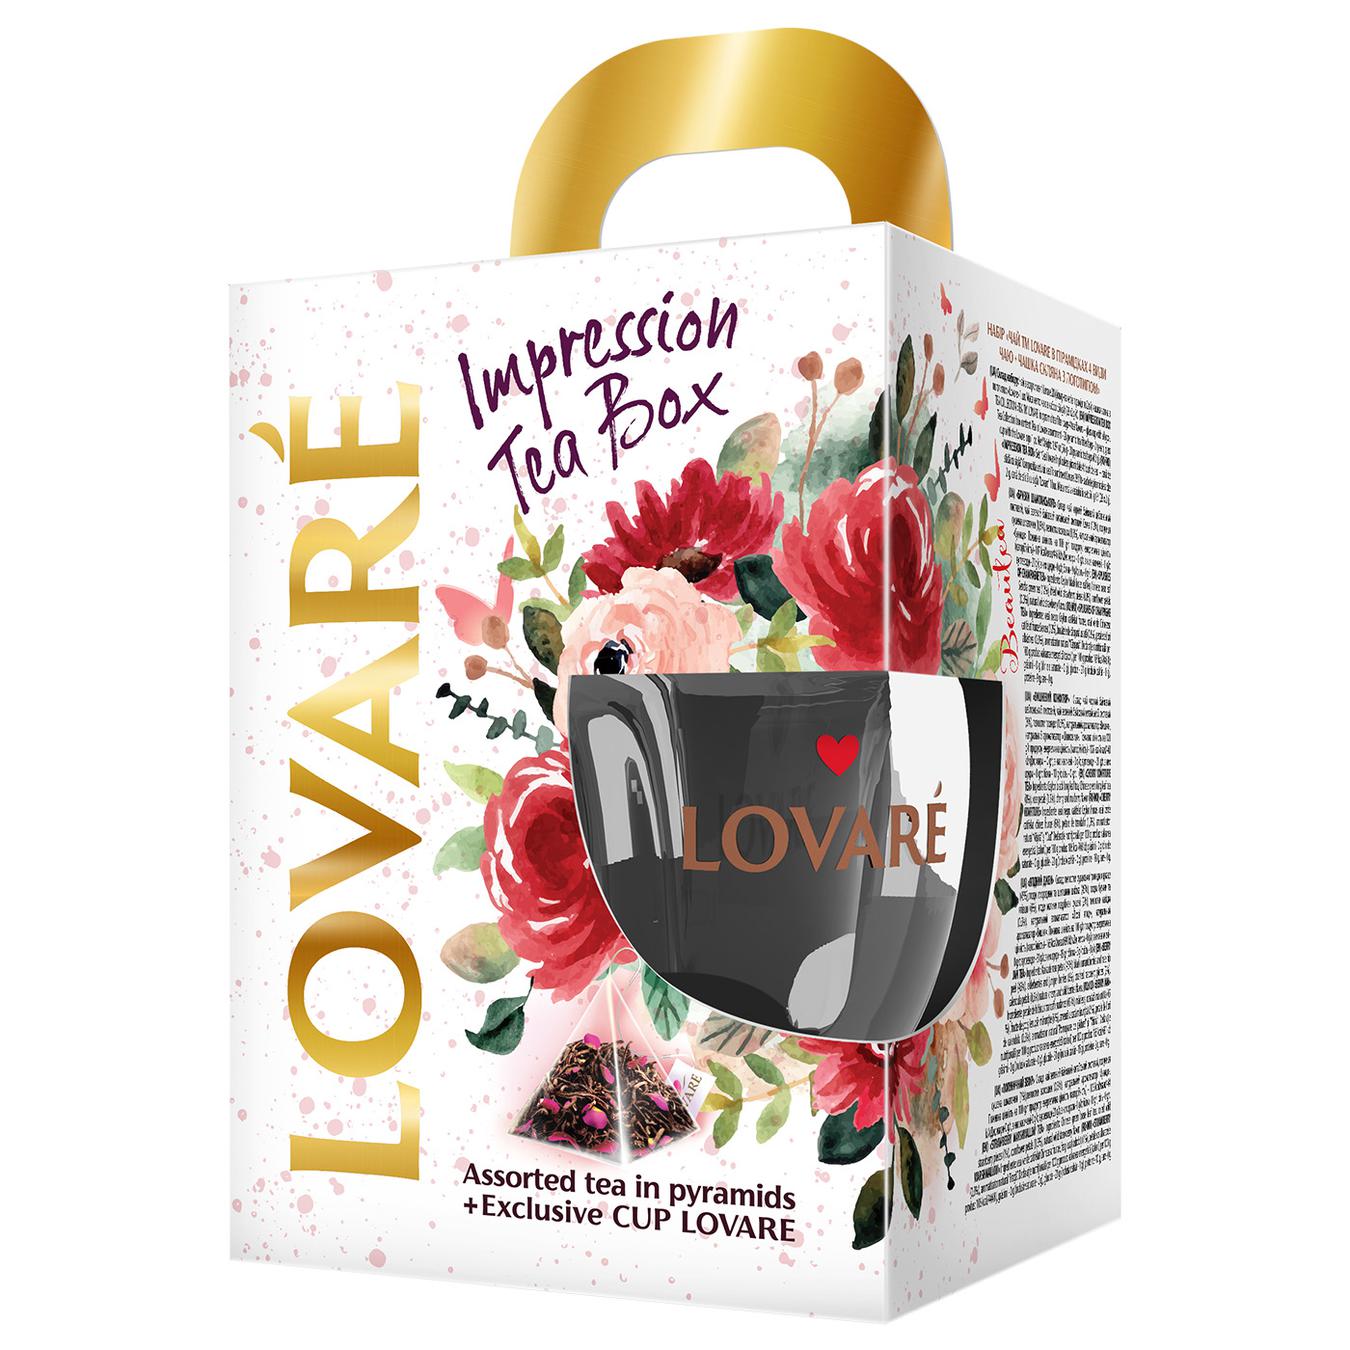 Set Collection of LOVARE teas Impression tea box 4 types of pyramids of 7 pcs + cup with logo 56g